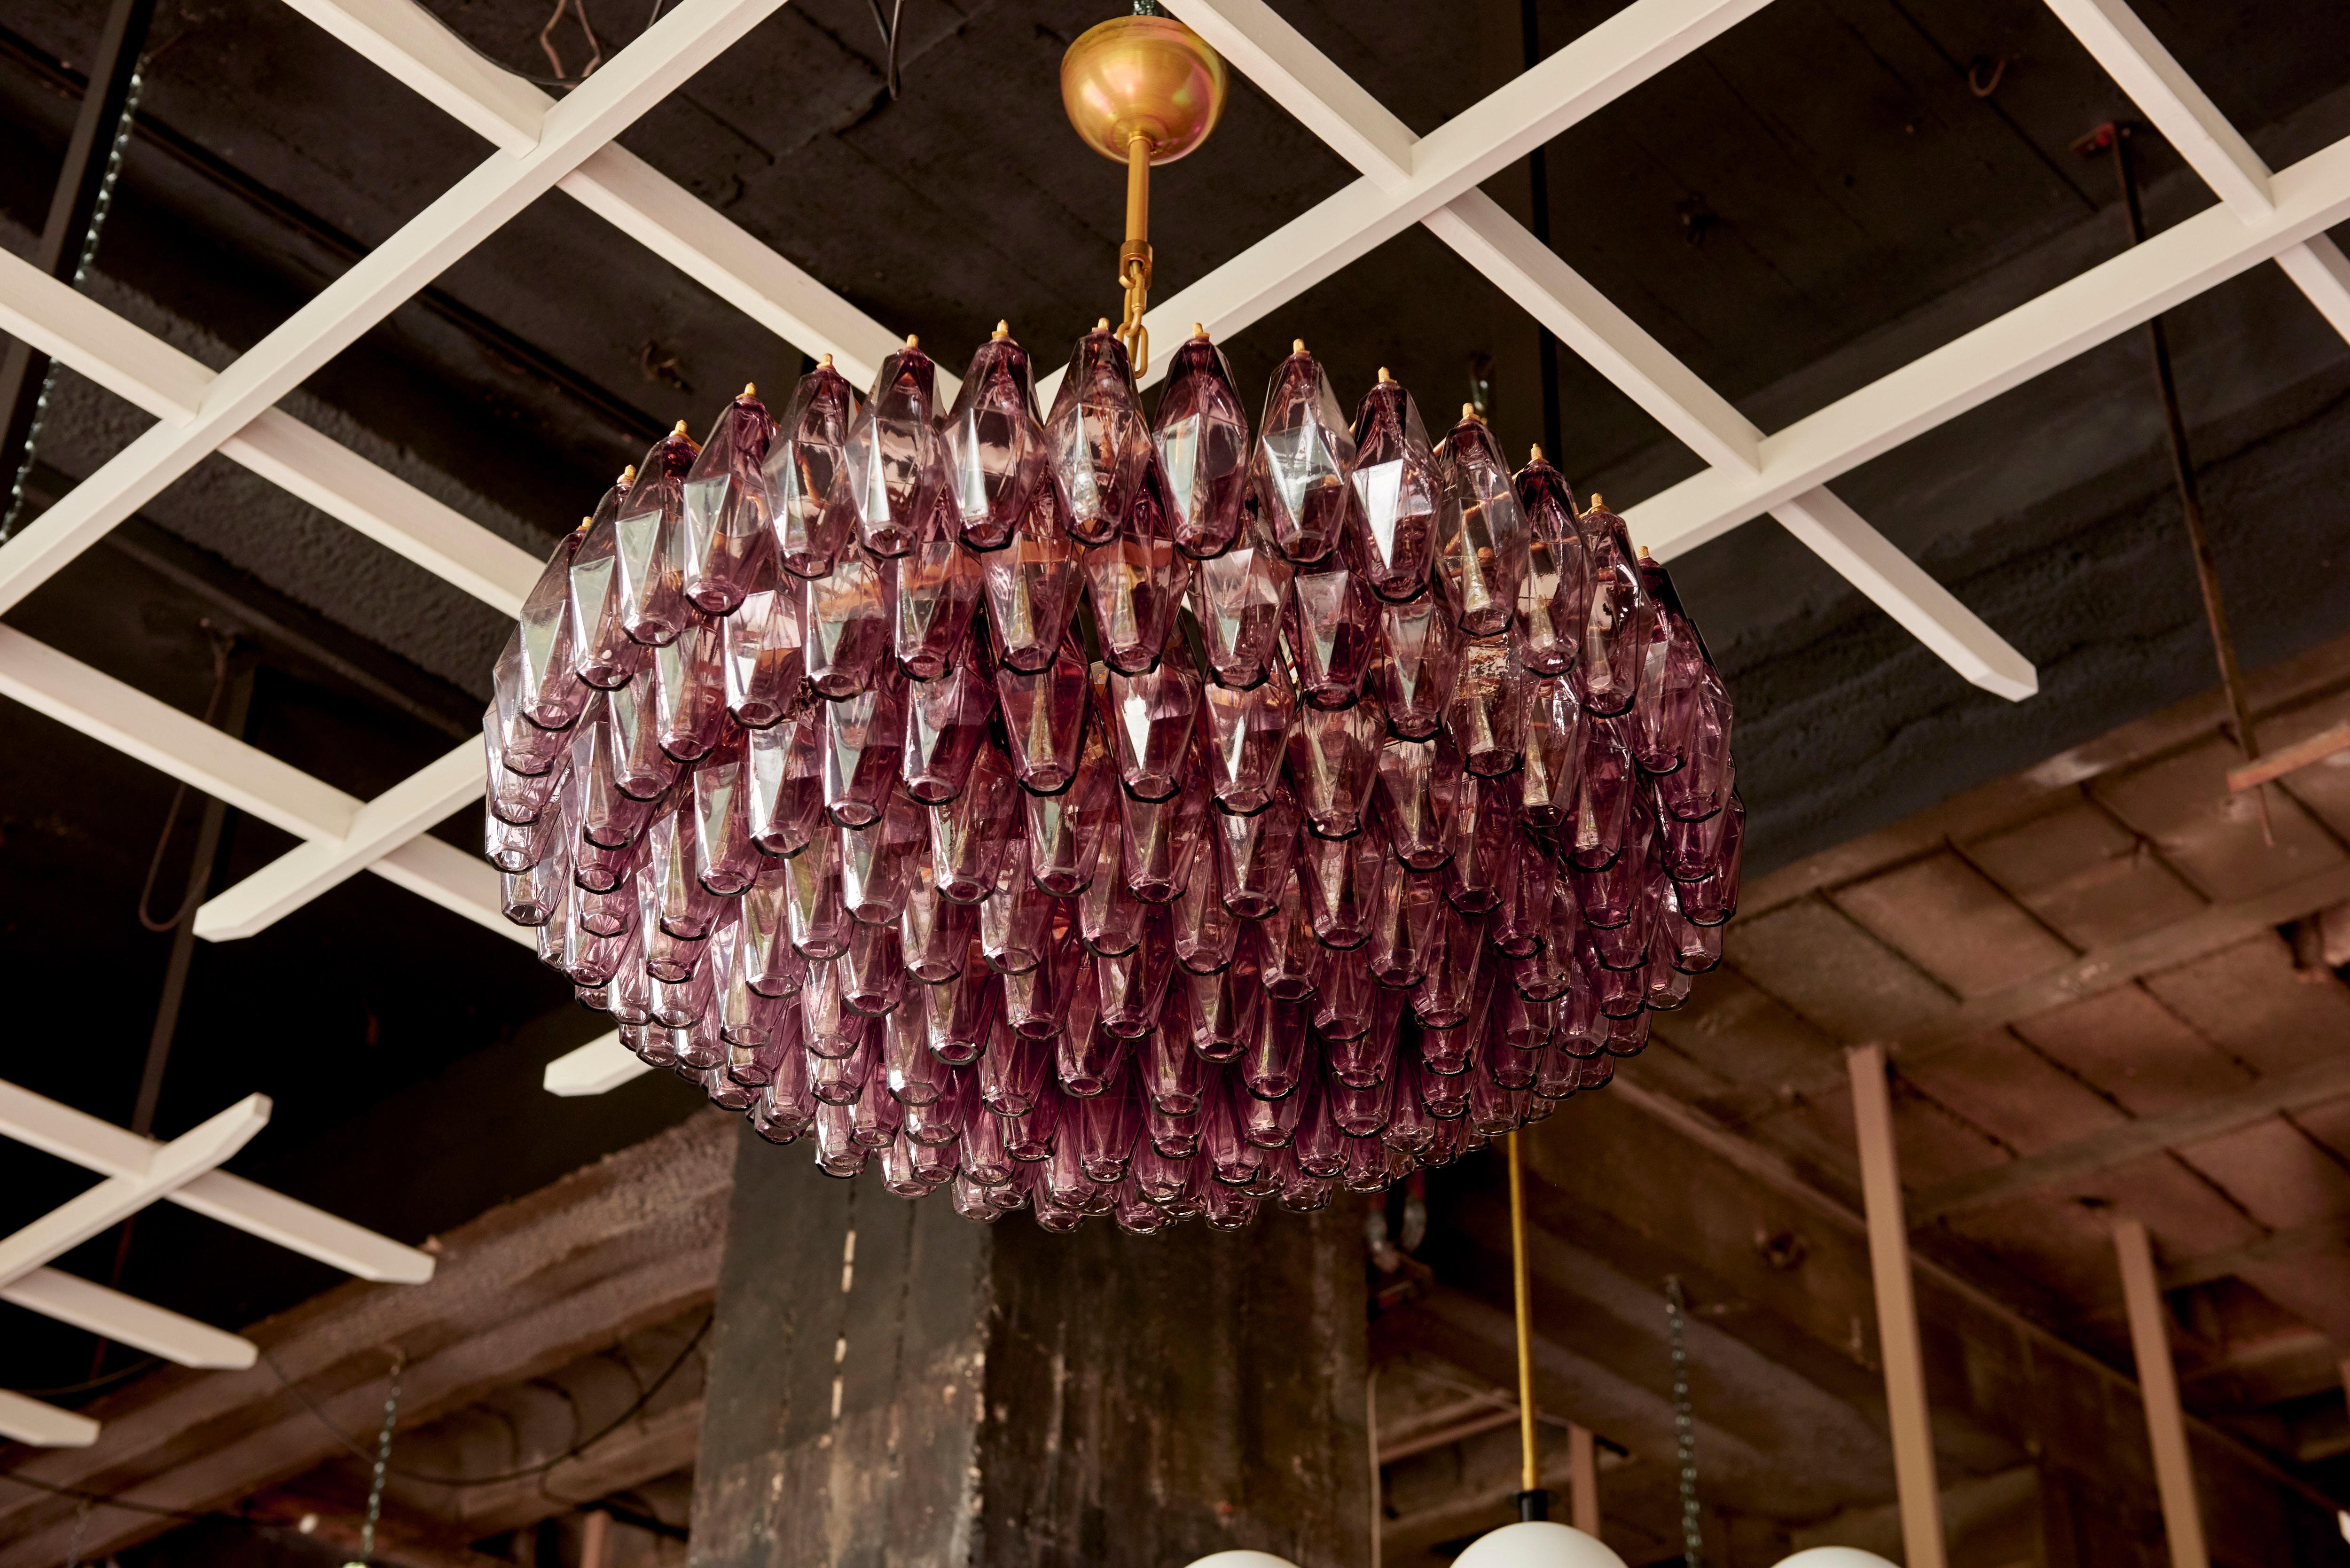 Very huge handblown amethyst Murano glass poliedri or polyhedral chandelier in the manner of Carlo Scarpa for Venini. The chandelier has a impressive size and is in very good condition. 

To be on the safe side, the lamp should be checked locally by